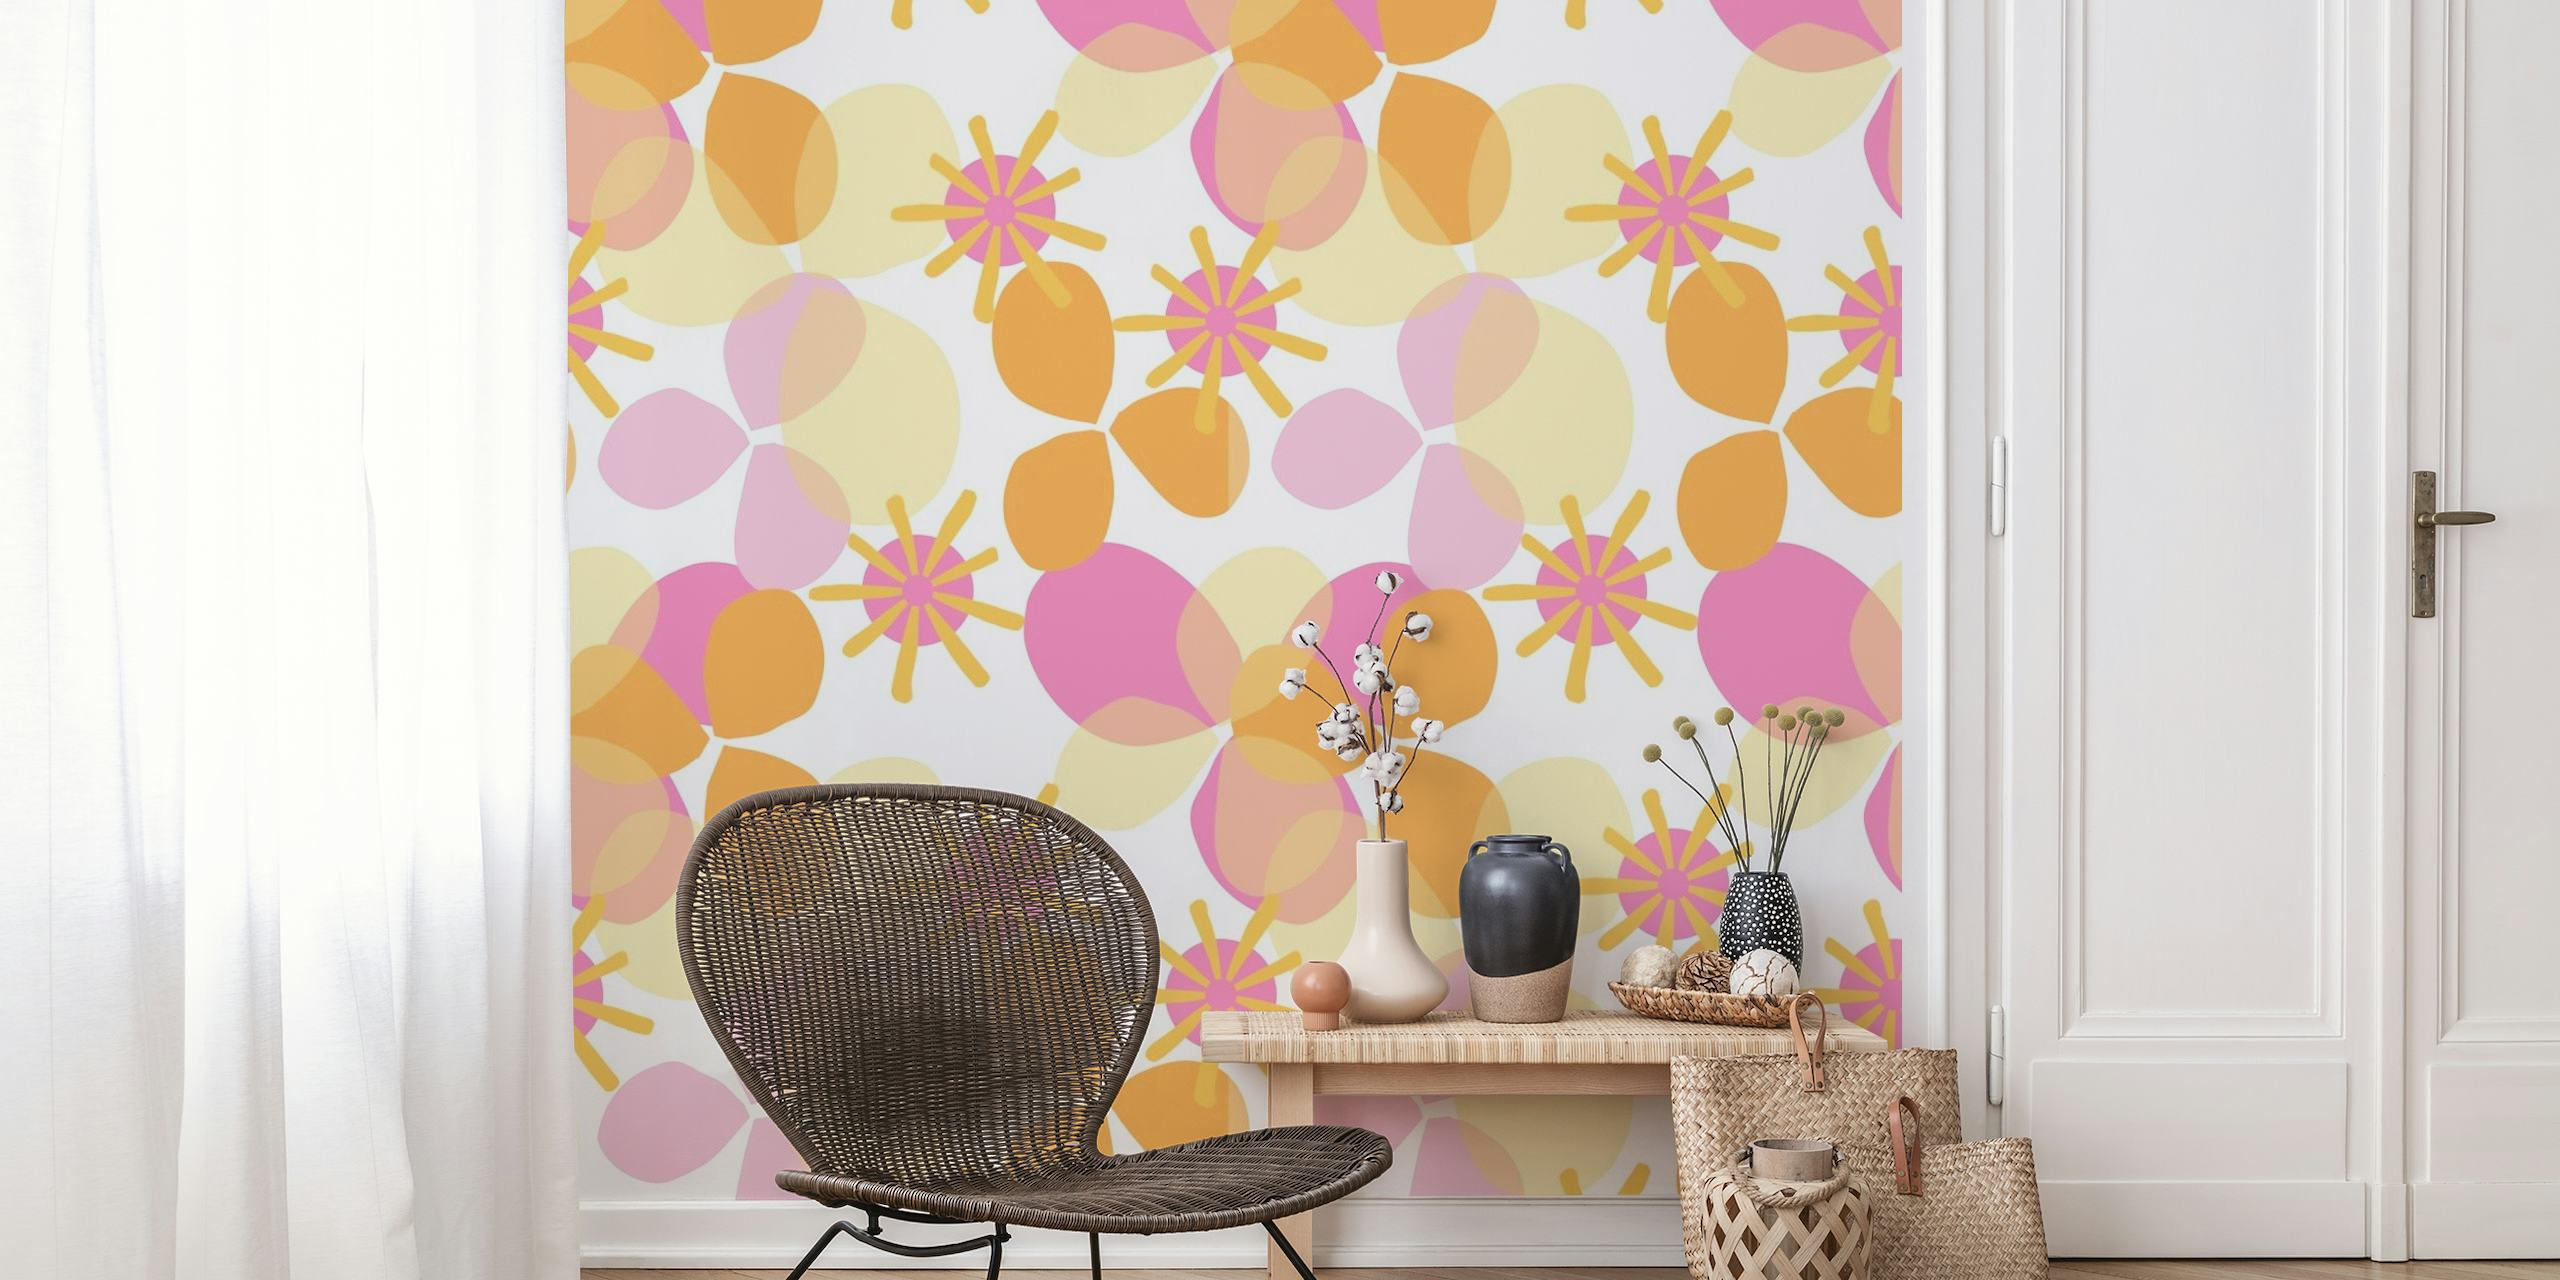 Colorful geometric and floral patterned wall mural named Party Play